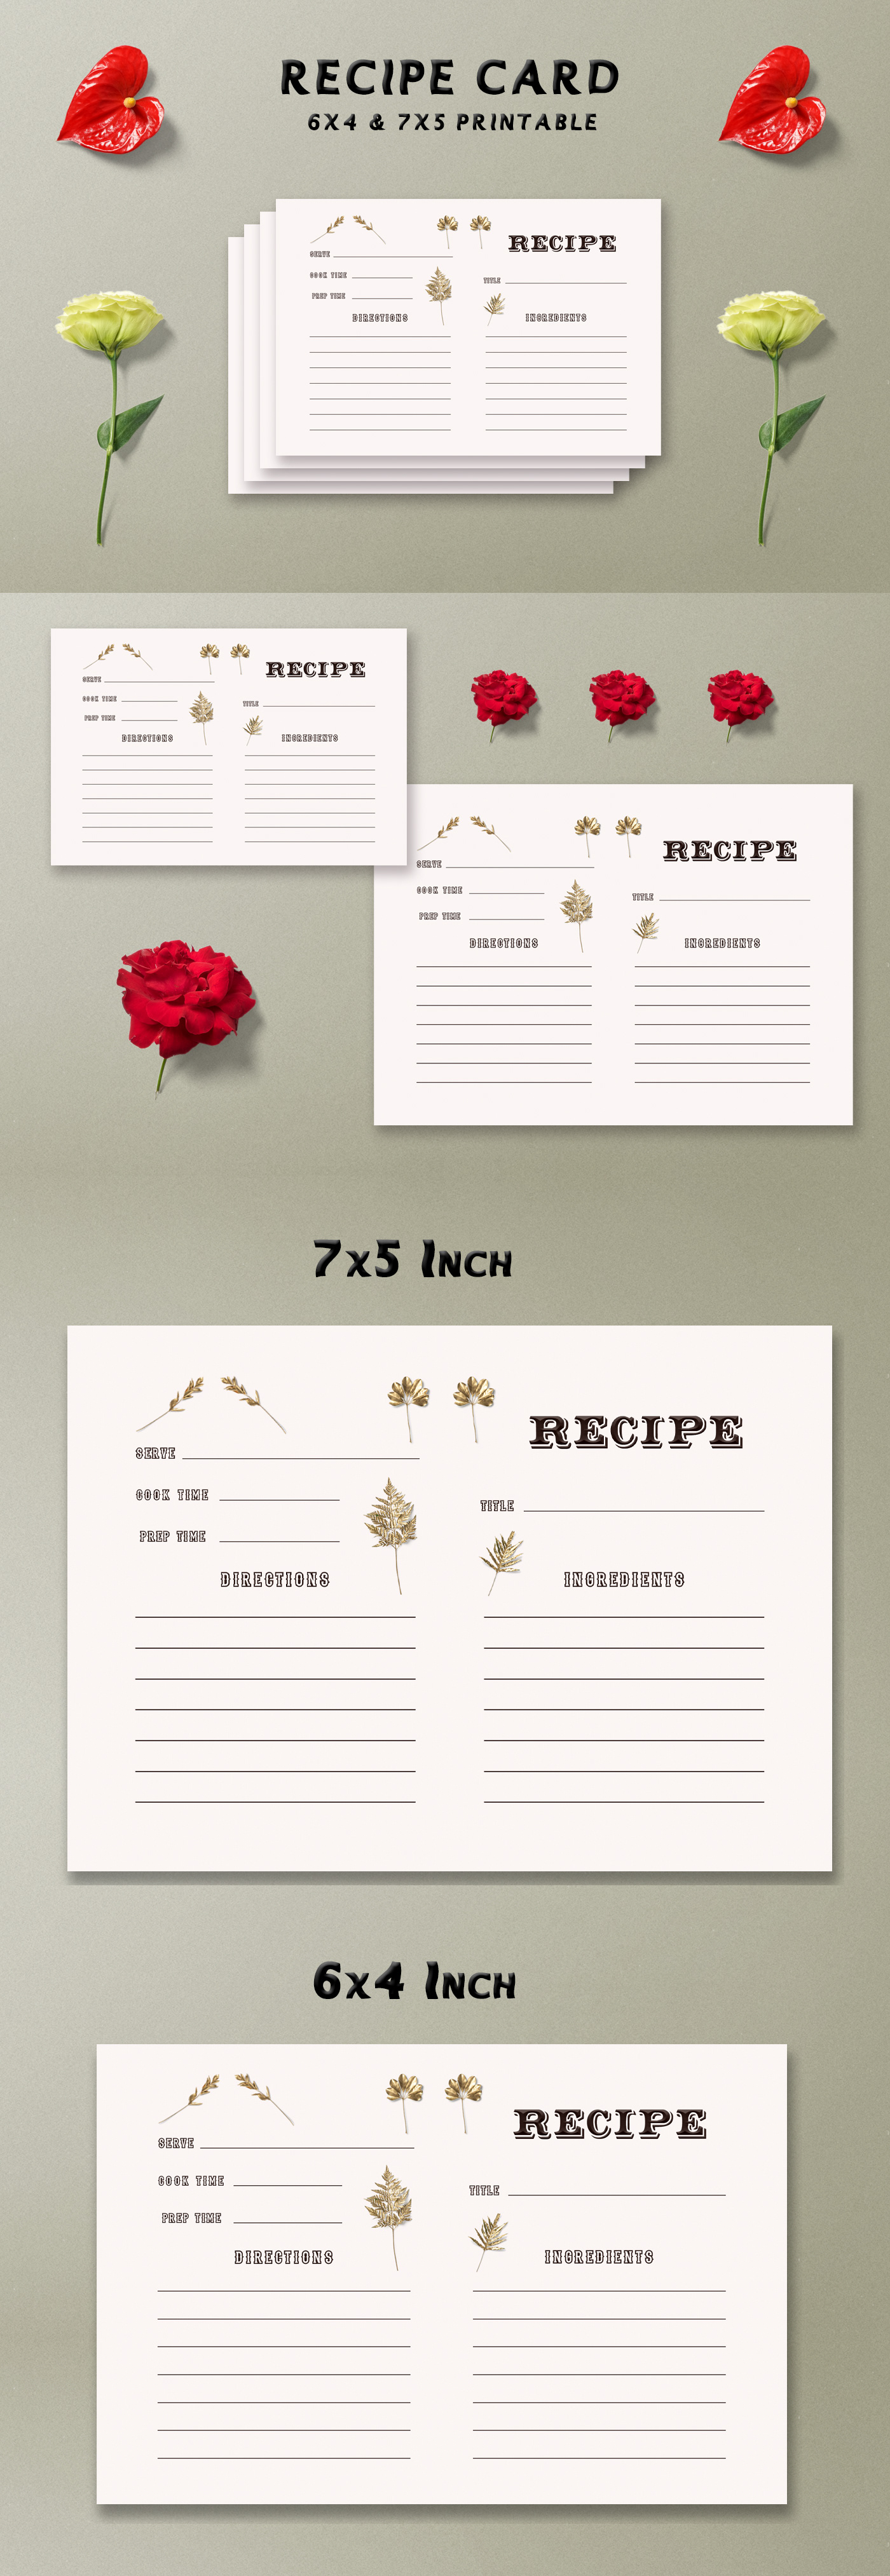 Free Golden Floral Recipe Card Template on Behance Intended For Recipe Card Design Template